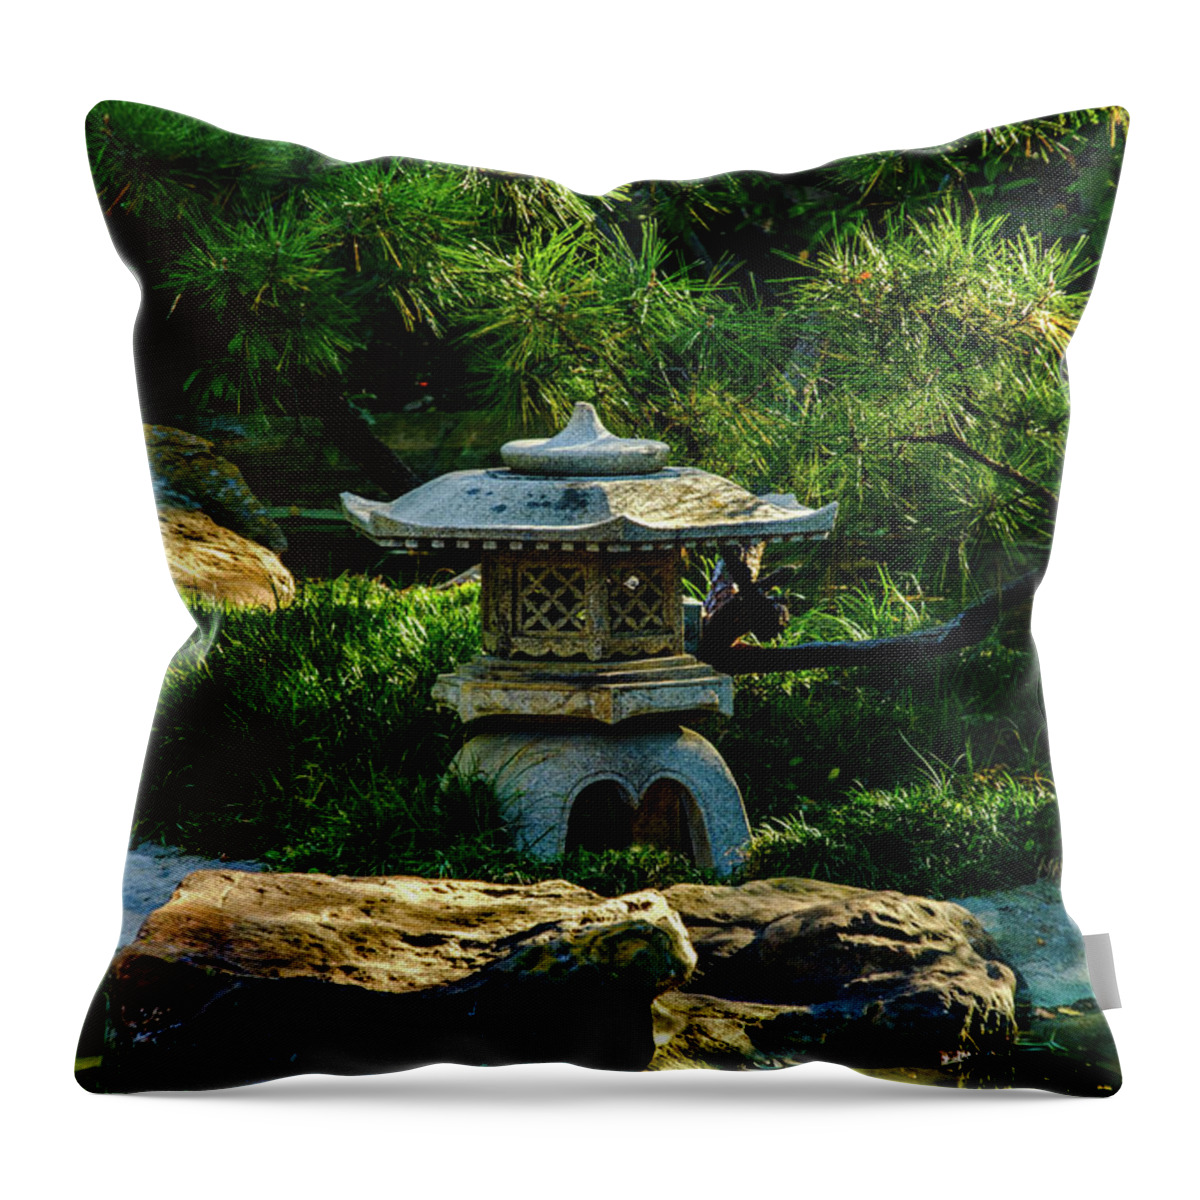 Red Maple Leaf Throw Pillow featuring the photograph Pagoda Rock by Johnny Boyd